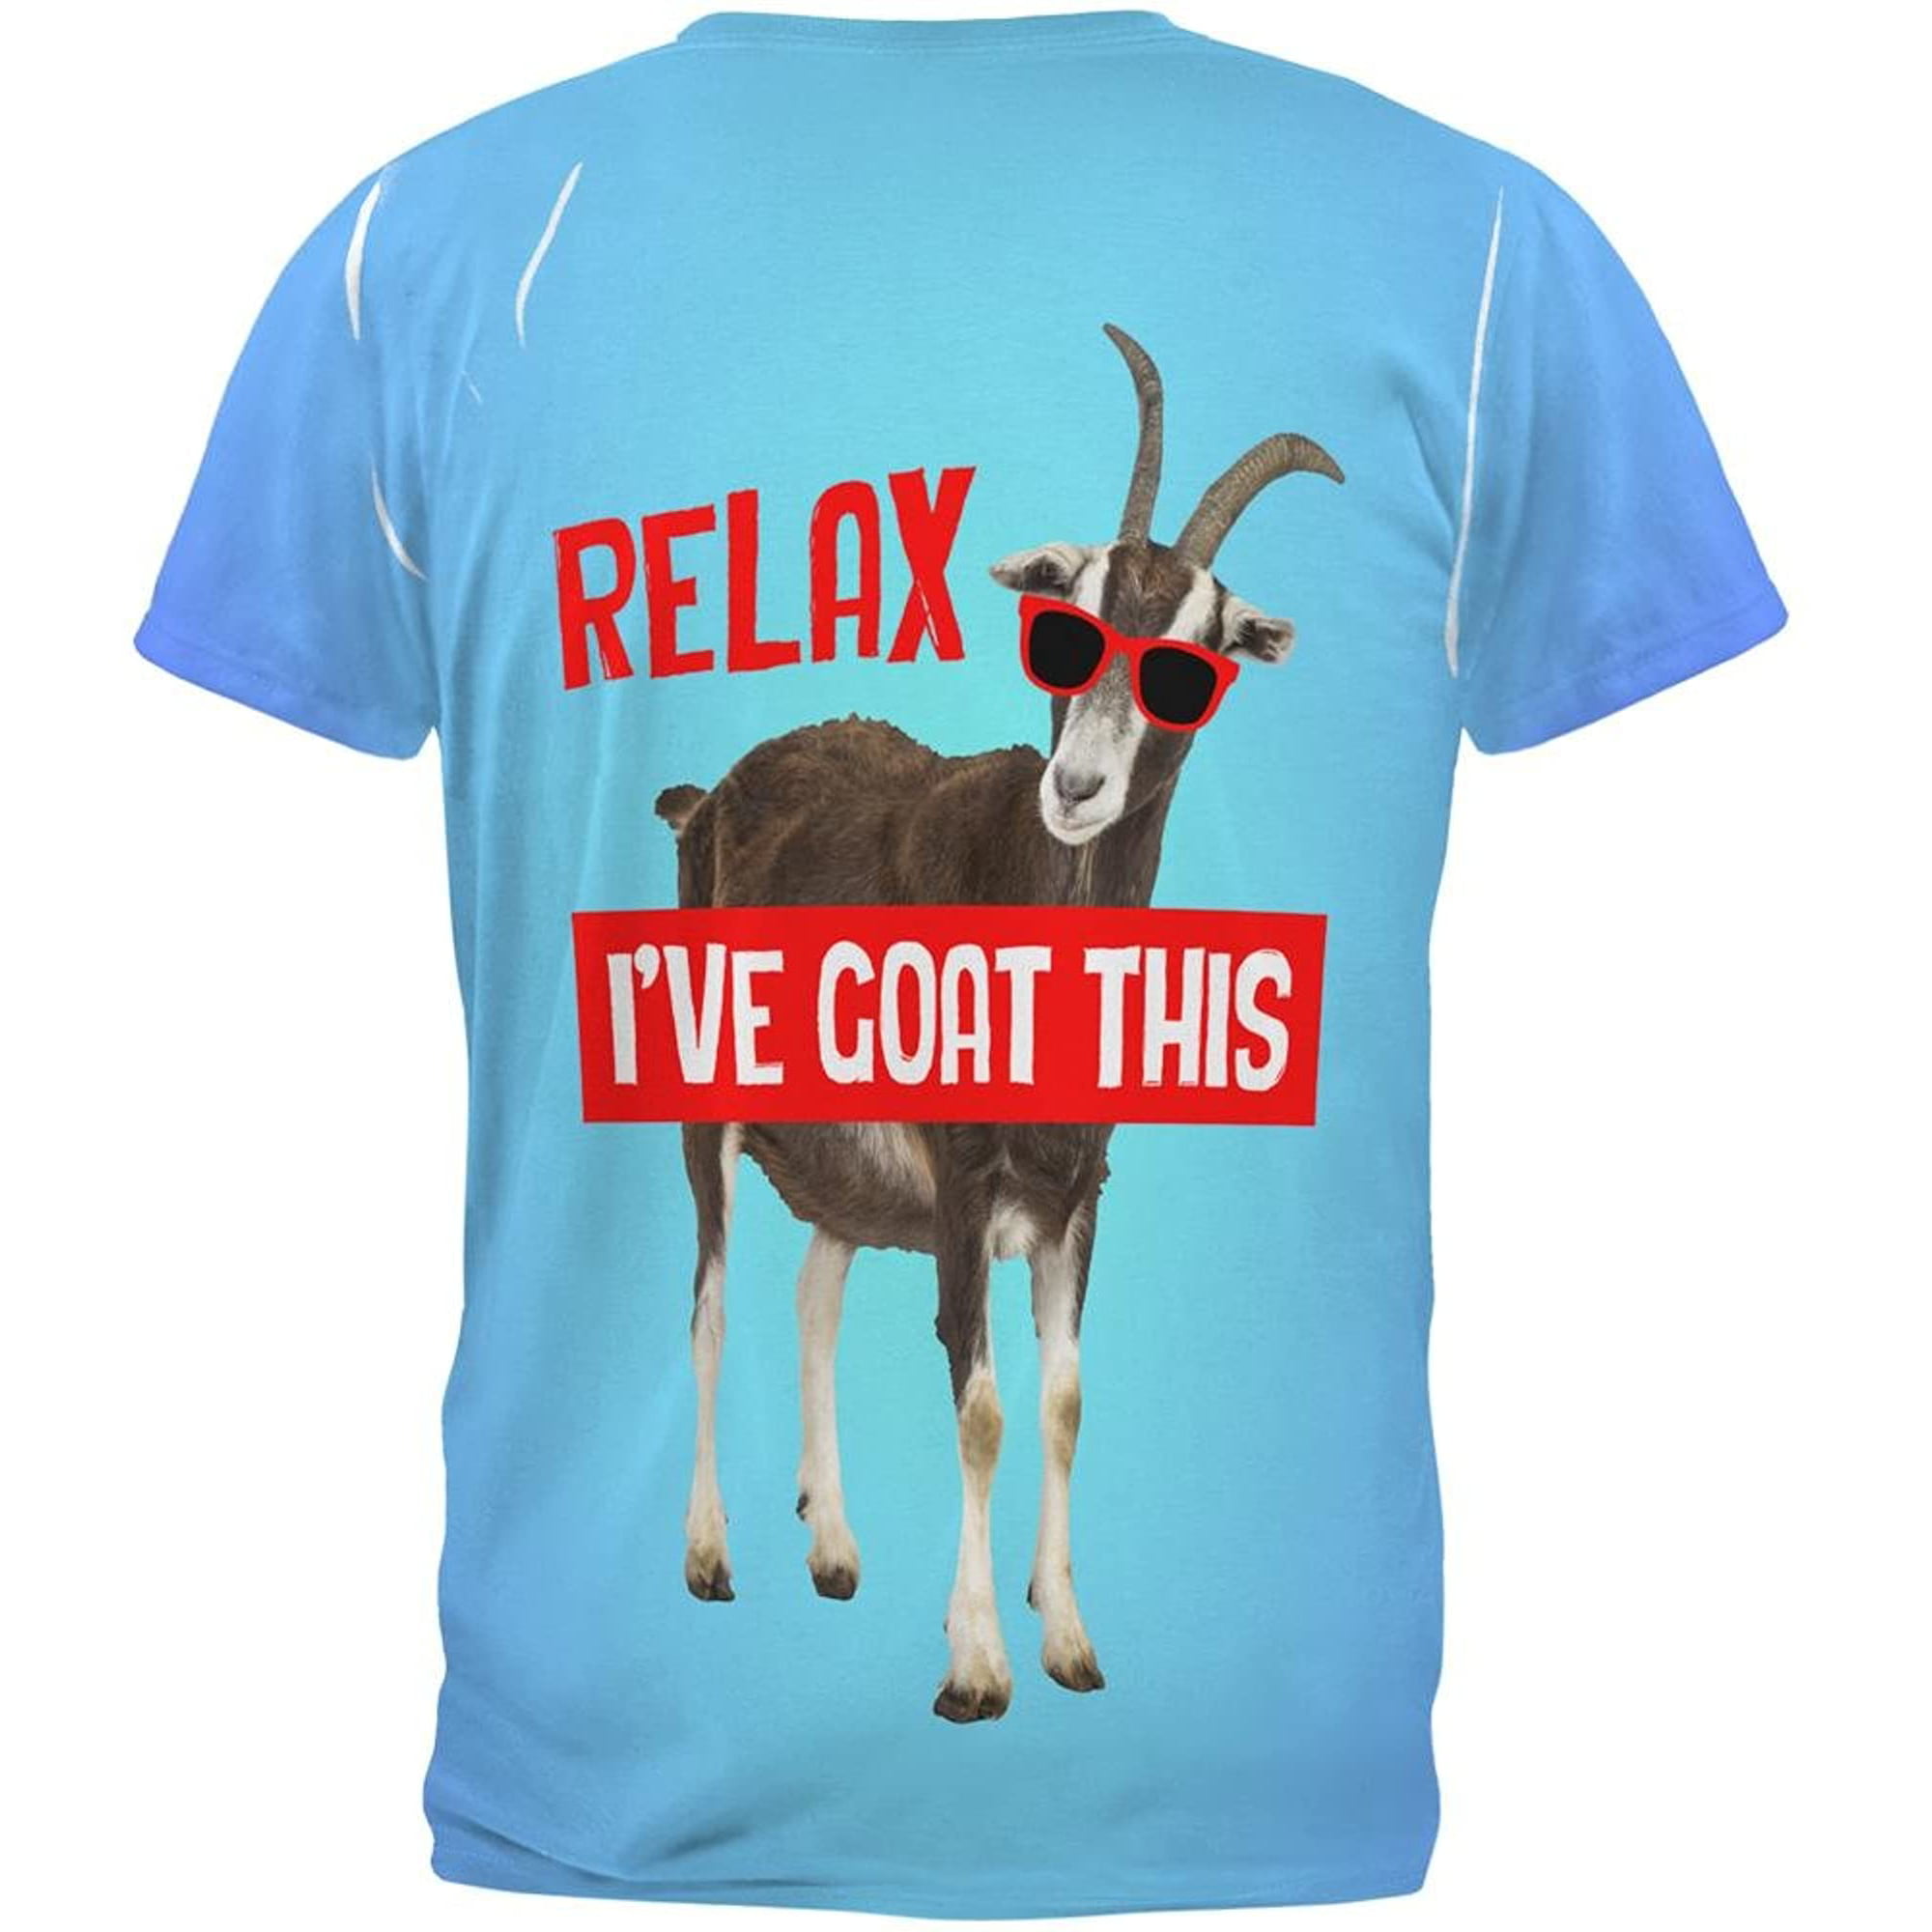 Animal World Relax Ive Goat Got This All Over Mens T Shirt | Walmart Canada